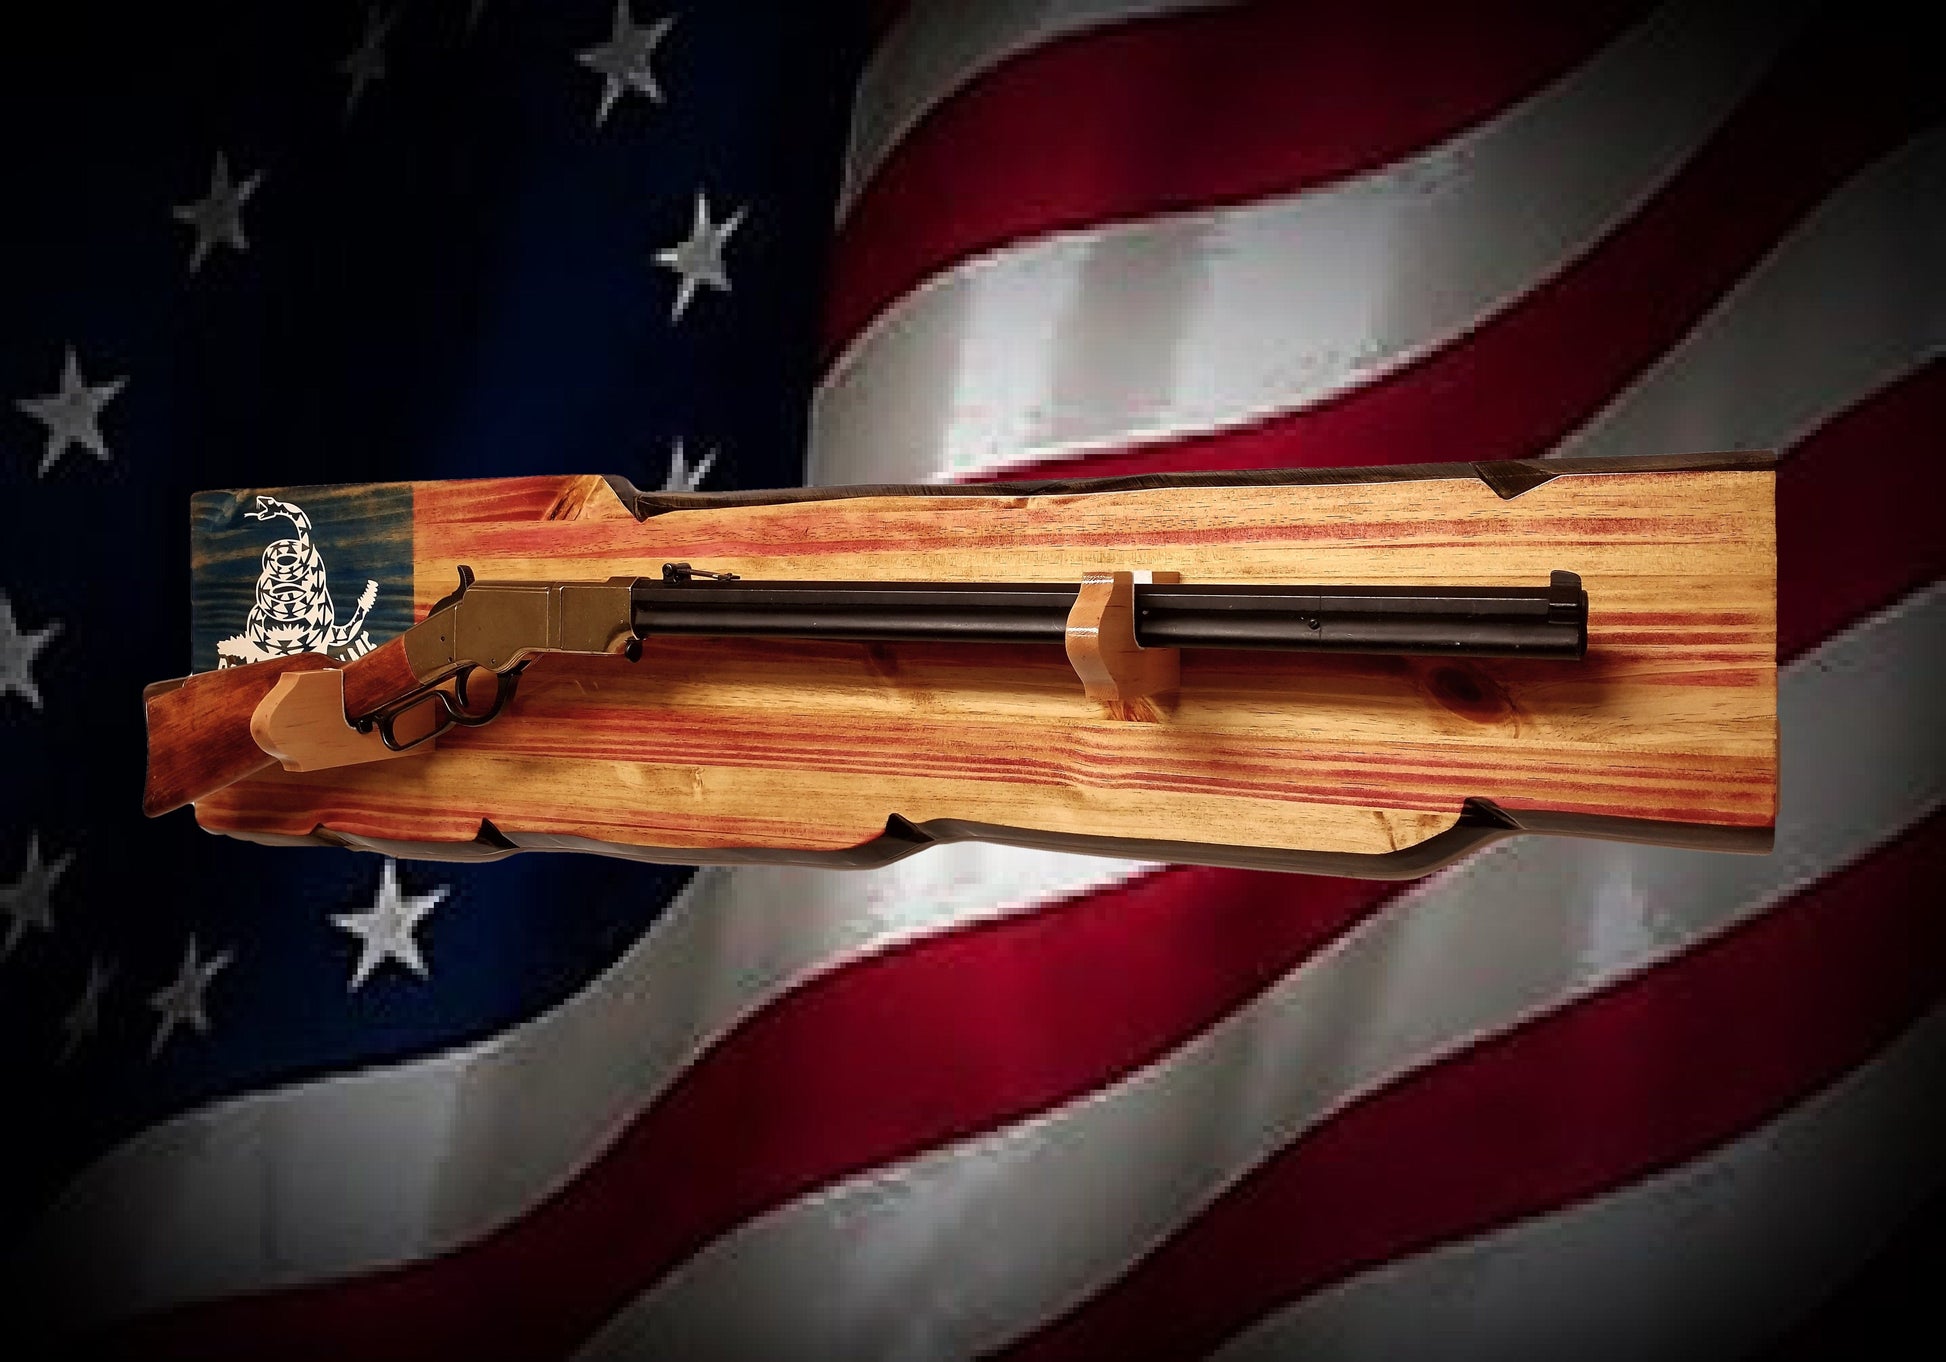 Walker Wood Gifts gun rack Rustic "Don't Tread On Me" Gun Rack Lever Action Rifle Wall Mount Americana Collectors Gift Décor